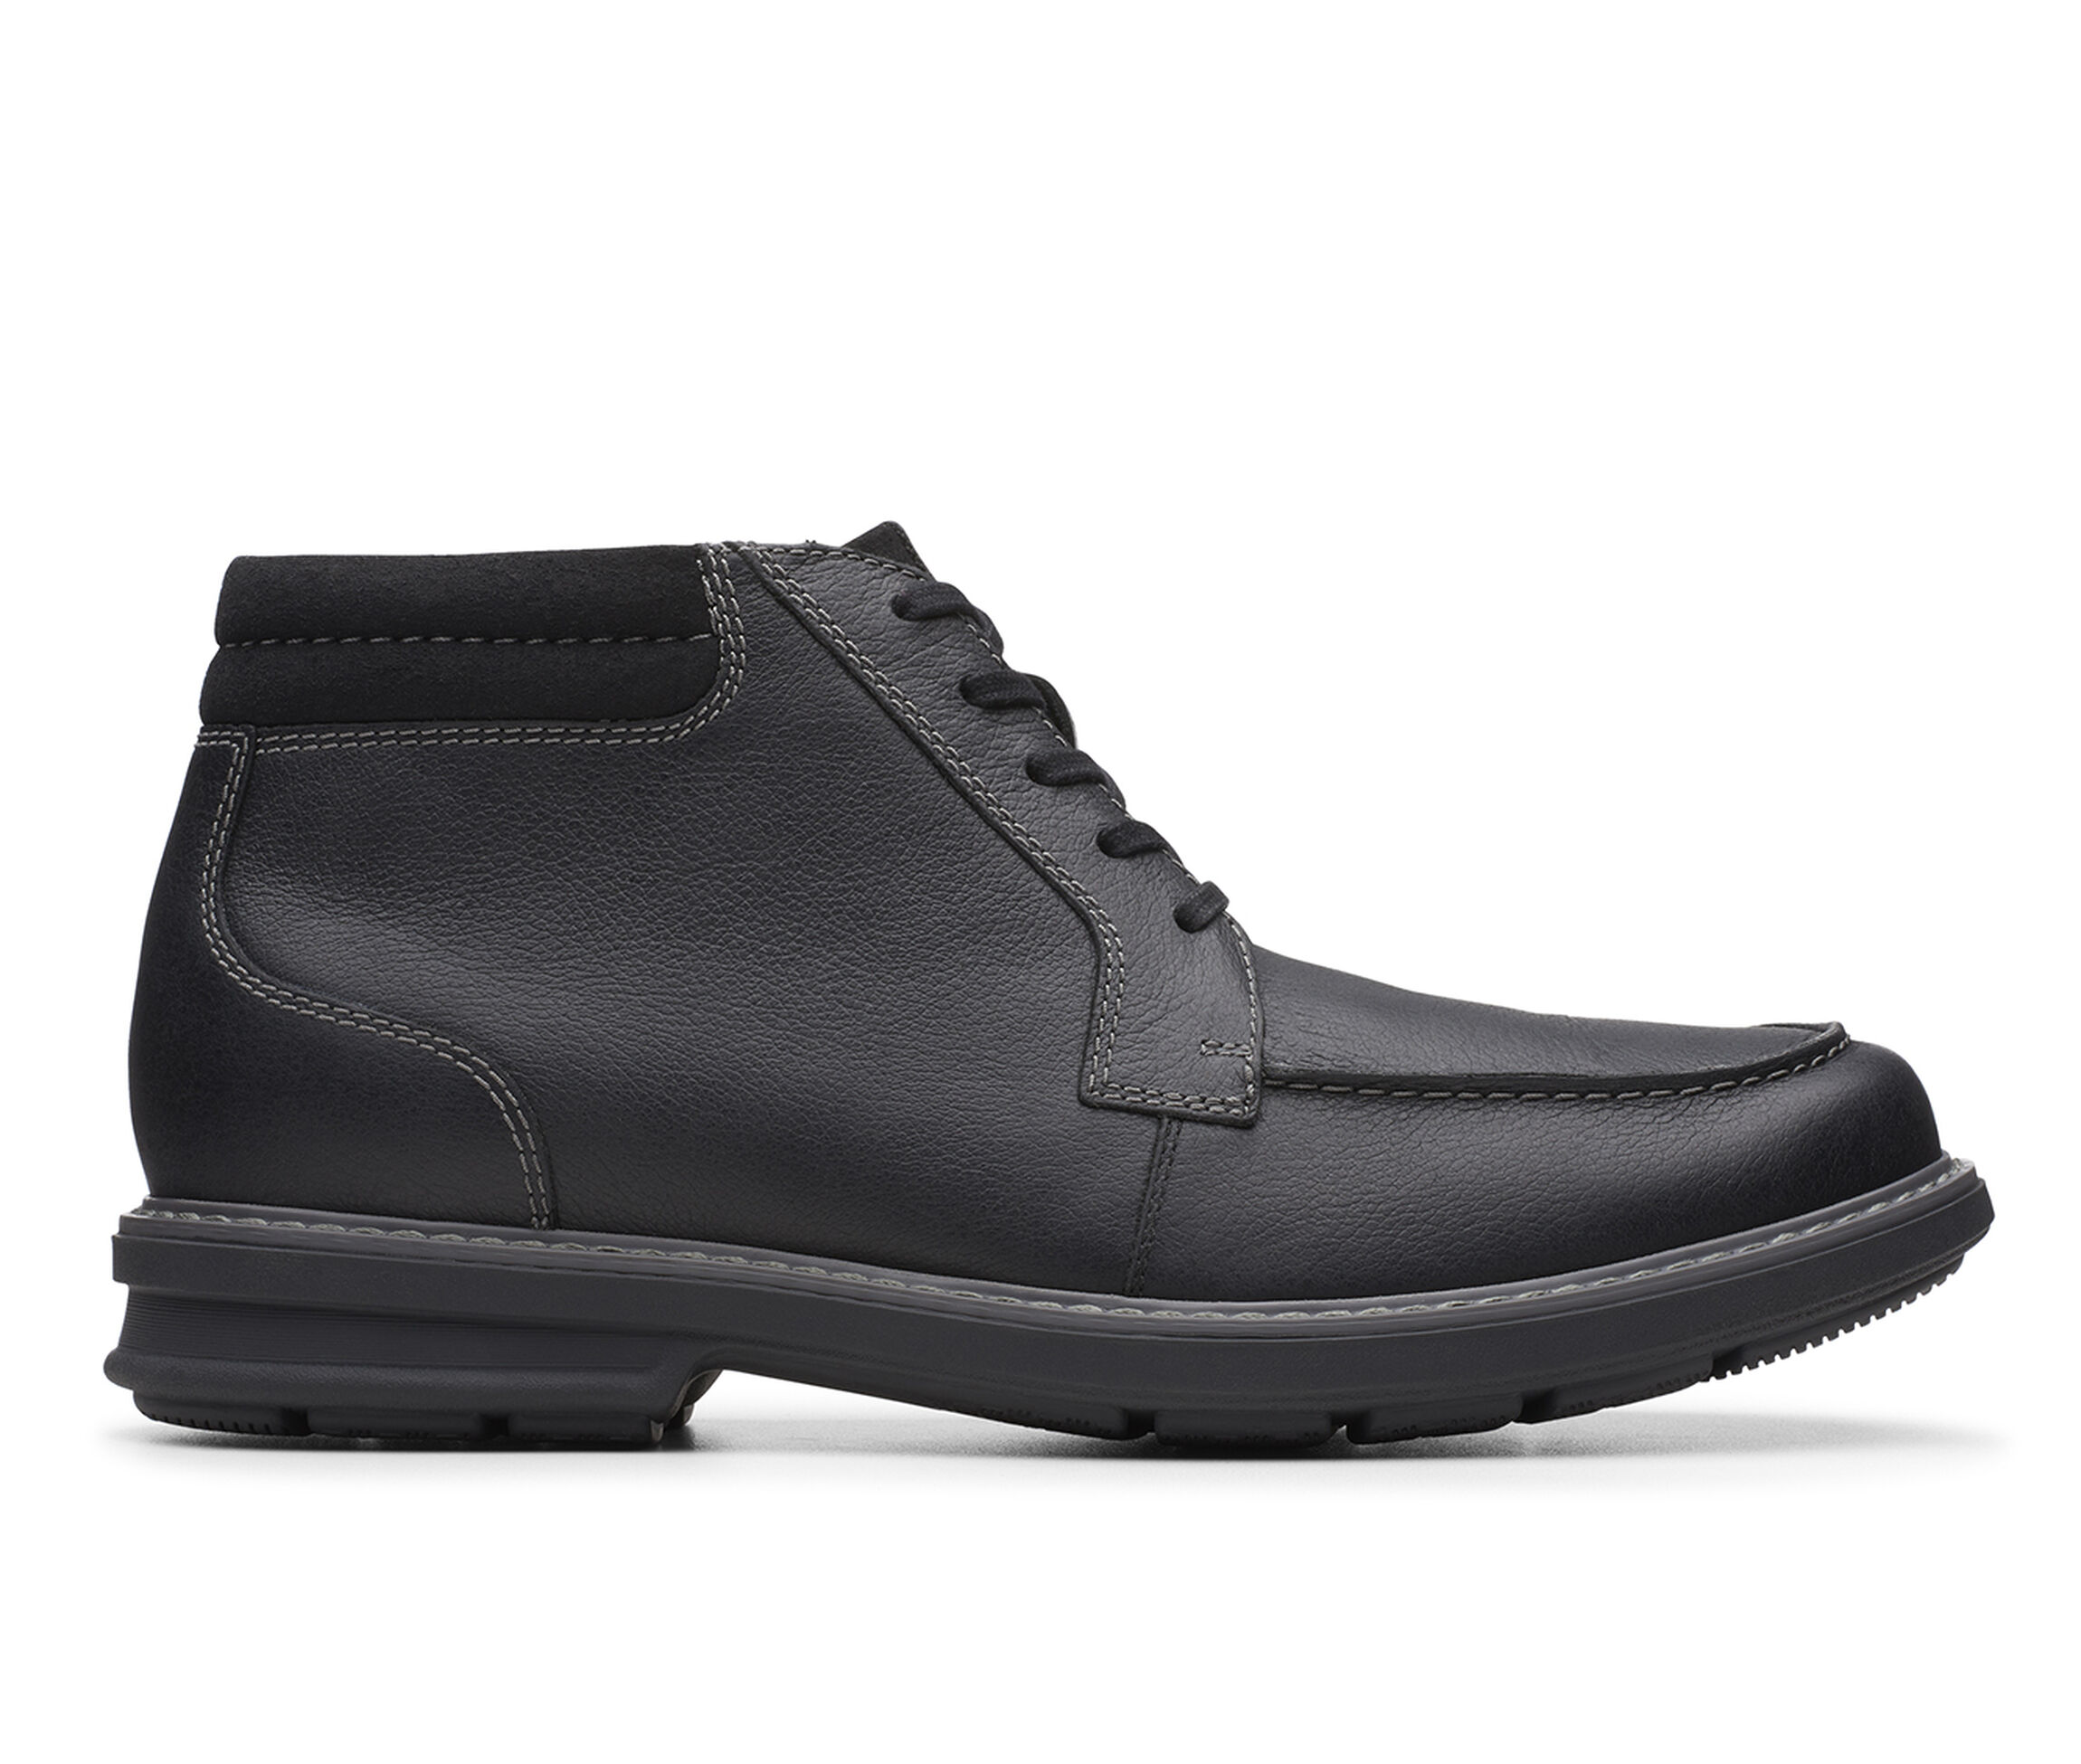 Clarks Rendell Rise Men's Boots (Black Leather)